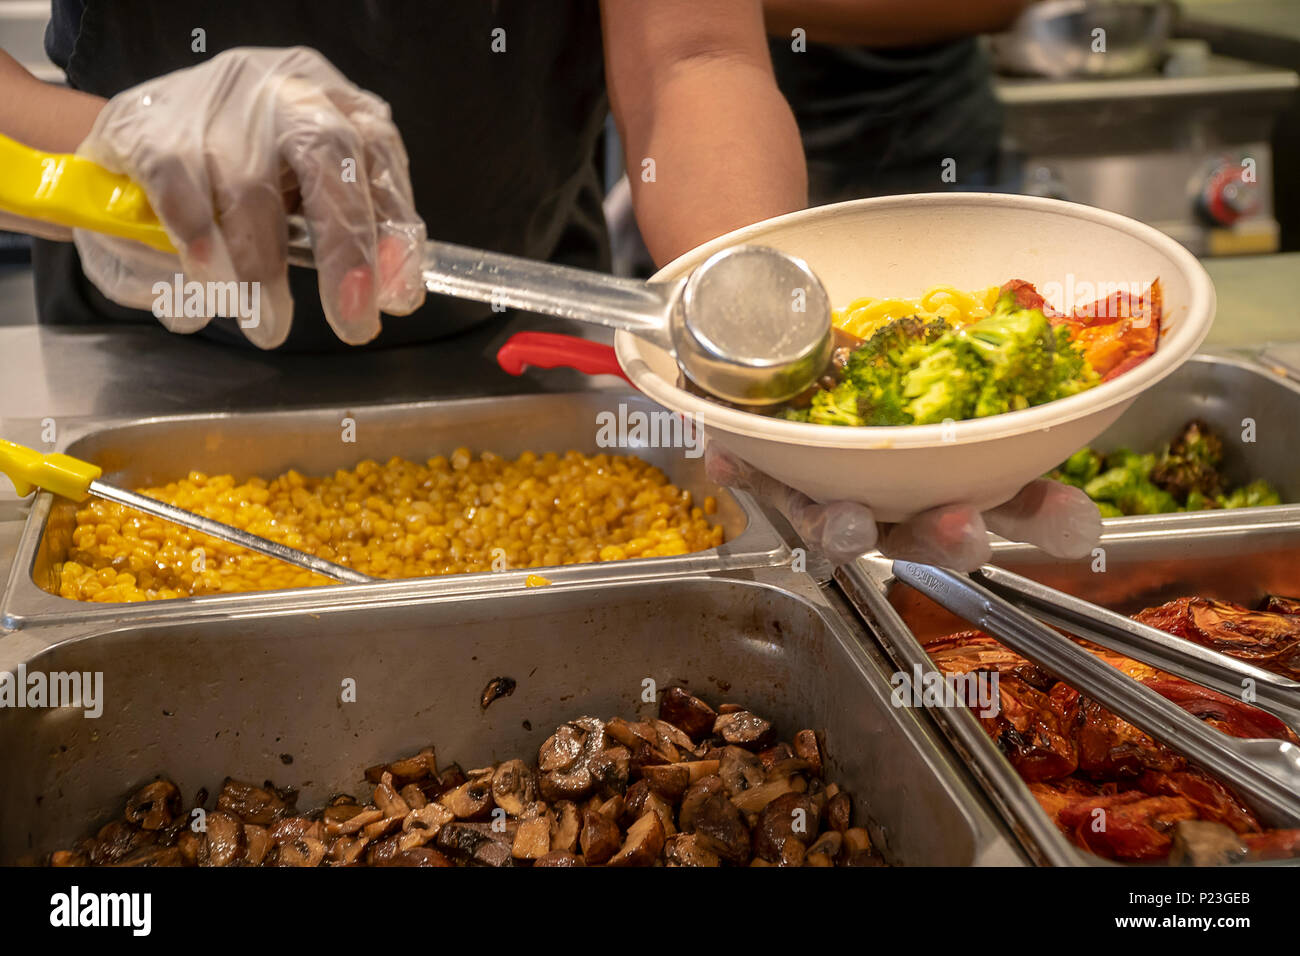 A worker prepares a salad for lunch in a fast food restaurant in Midtown Manhattan in New York on Thursday, June 7, 2018.   (© Richard B. Levine) Stock Photo